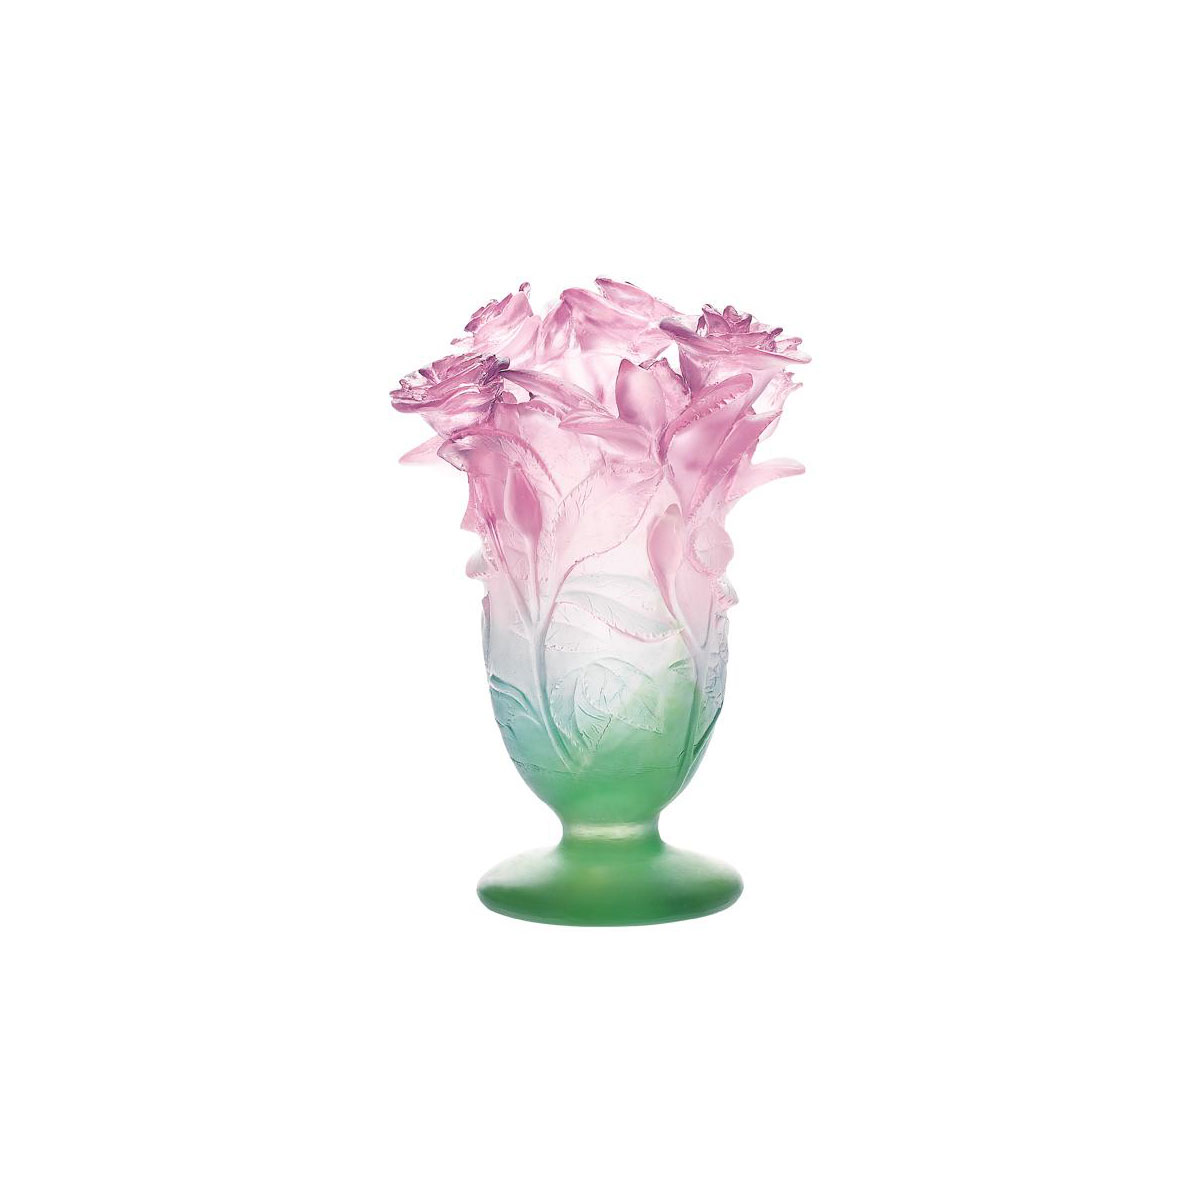 Daum Small Roses Vase in Green and Pink